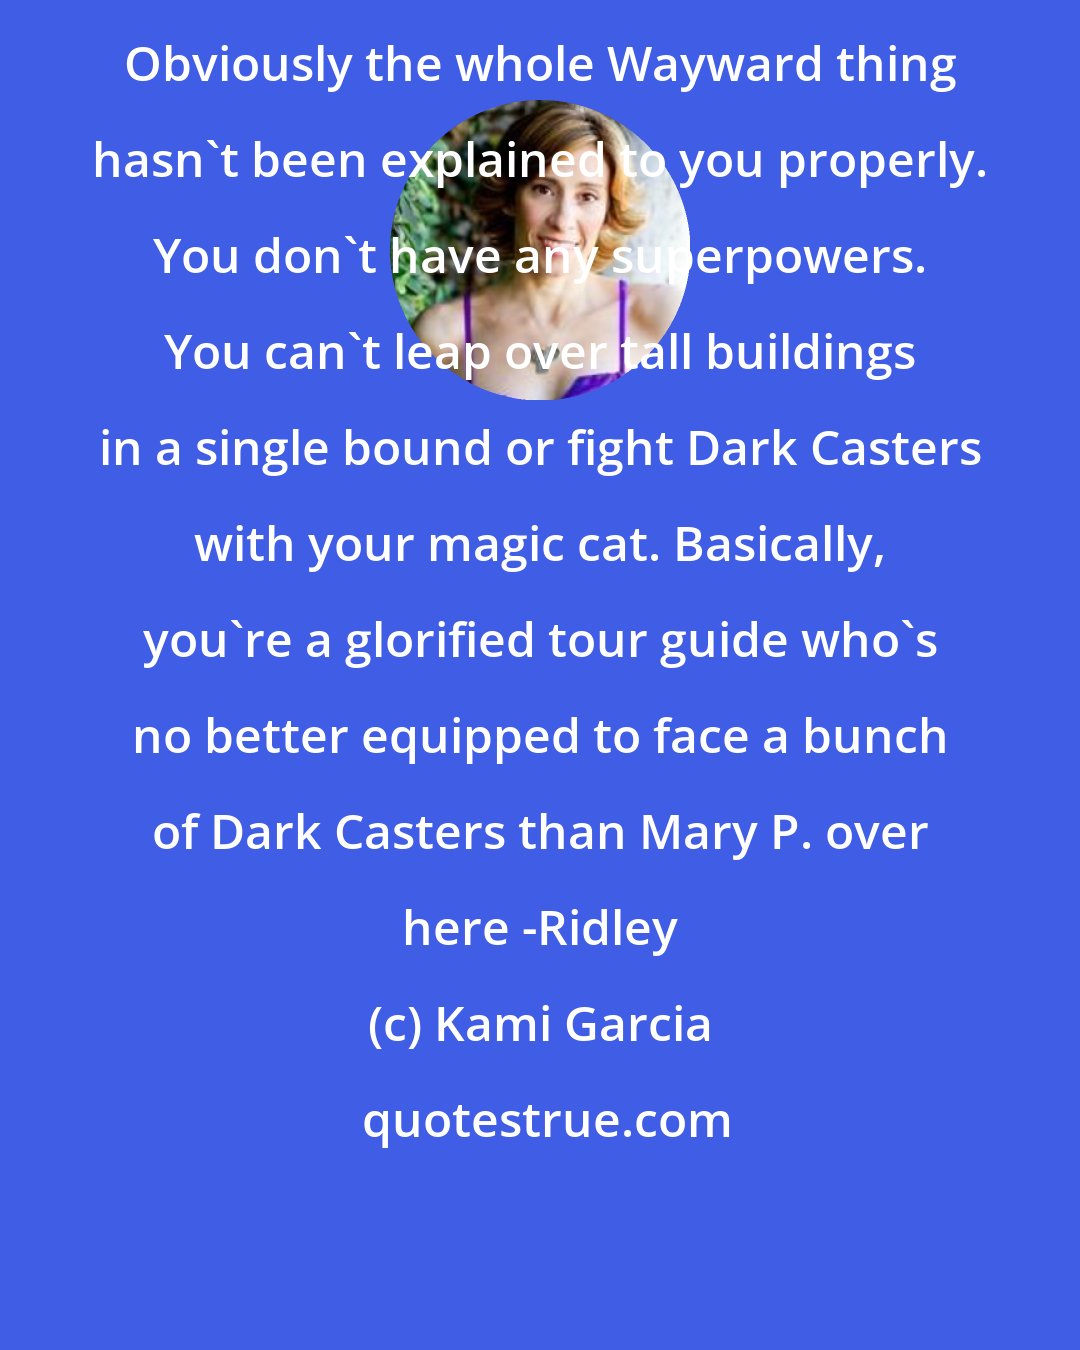 Kami Garcia: Obviously the whole Wayward thing hasn't been explained to you properly. You don't have any superpowers. You can't leap over tall buildings in a single bound or fight Dark Casters with your magic cat. Basically, you're a glorified tour guide who's no better equipped to face a bunch of Dark Casters than Mary P. over here -Ridley